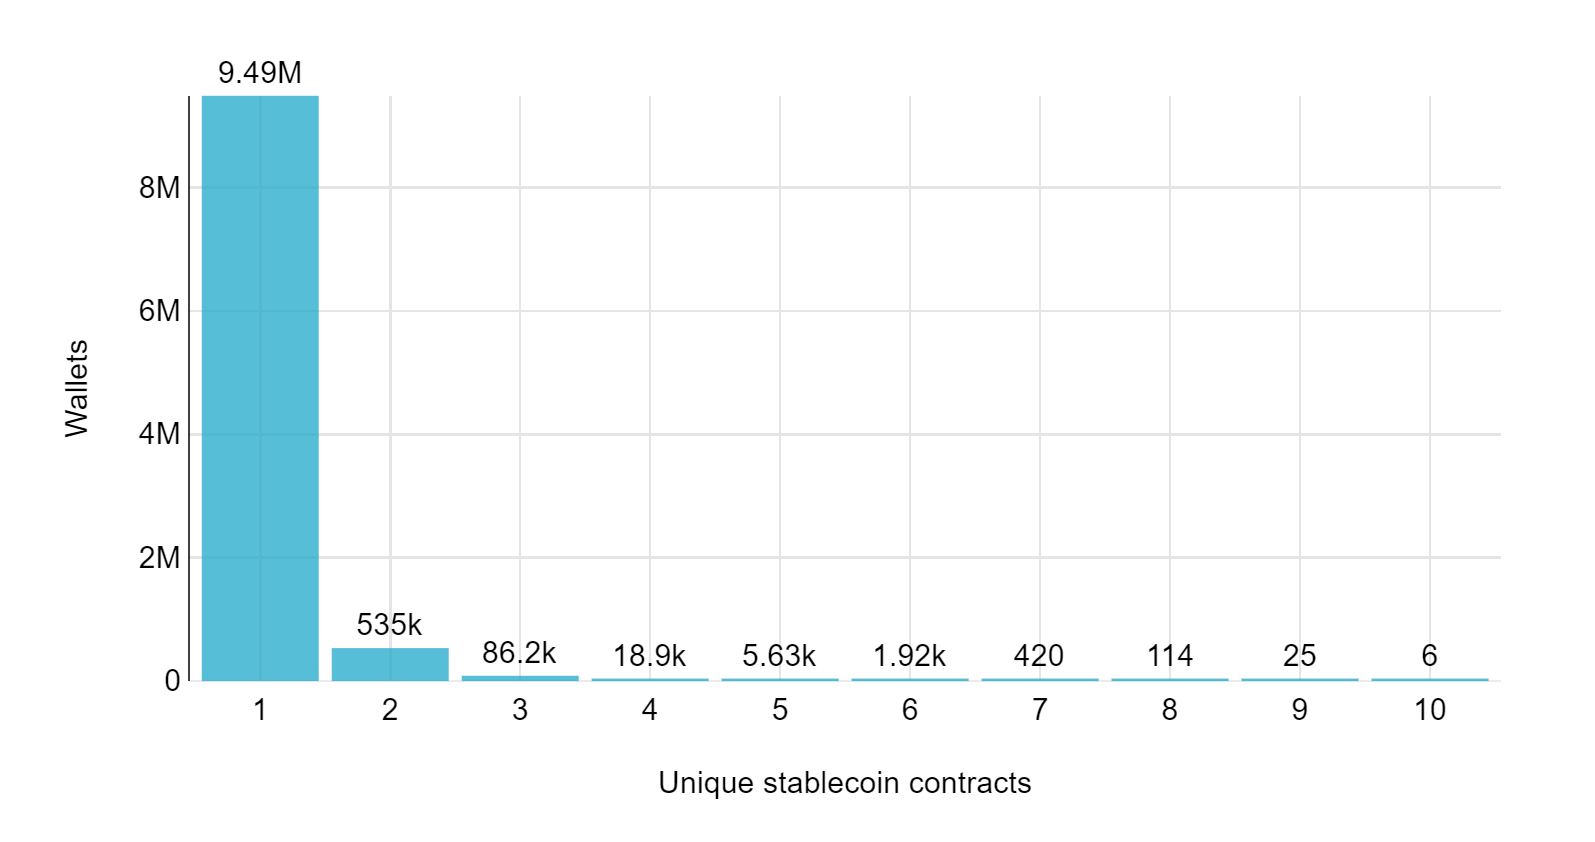 Wallet distribution by the number of top-5 stablecoins held. Stablecoins counted: DAI, USDT, USDC, BUSD, TUSD. Assets on the Ethereum chain and assets on the Polygon chain are treated as two unique stablecoins (eg. USDC on the Ethereum chain and USDC on the Polygon chain are treated as two unique stablecoins)